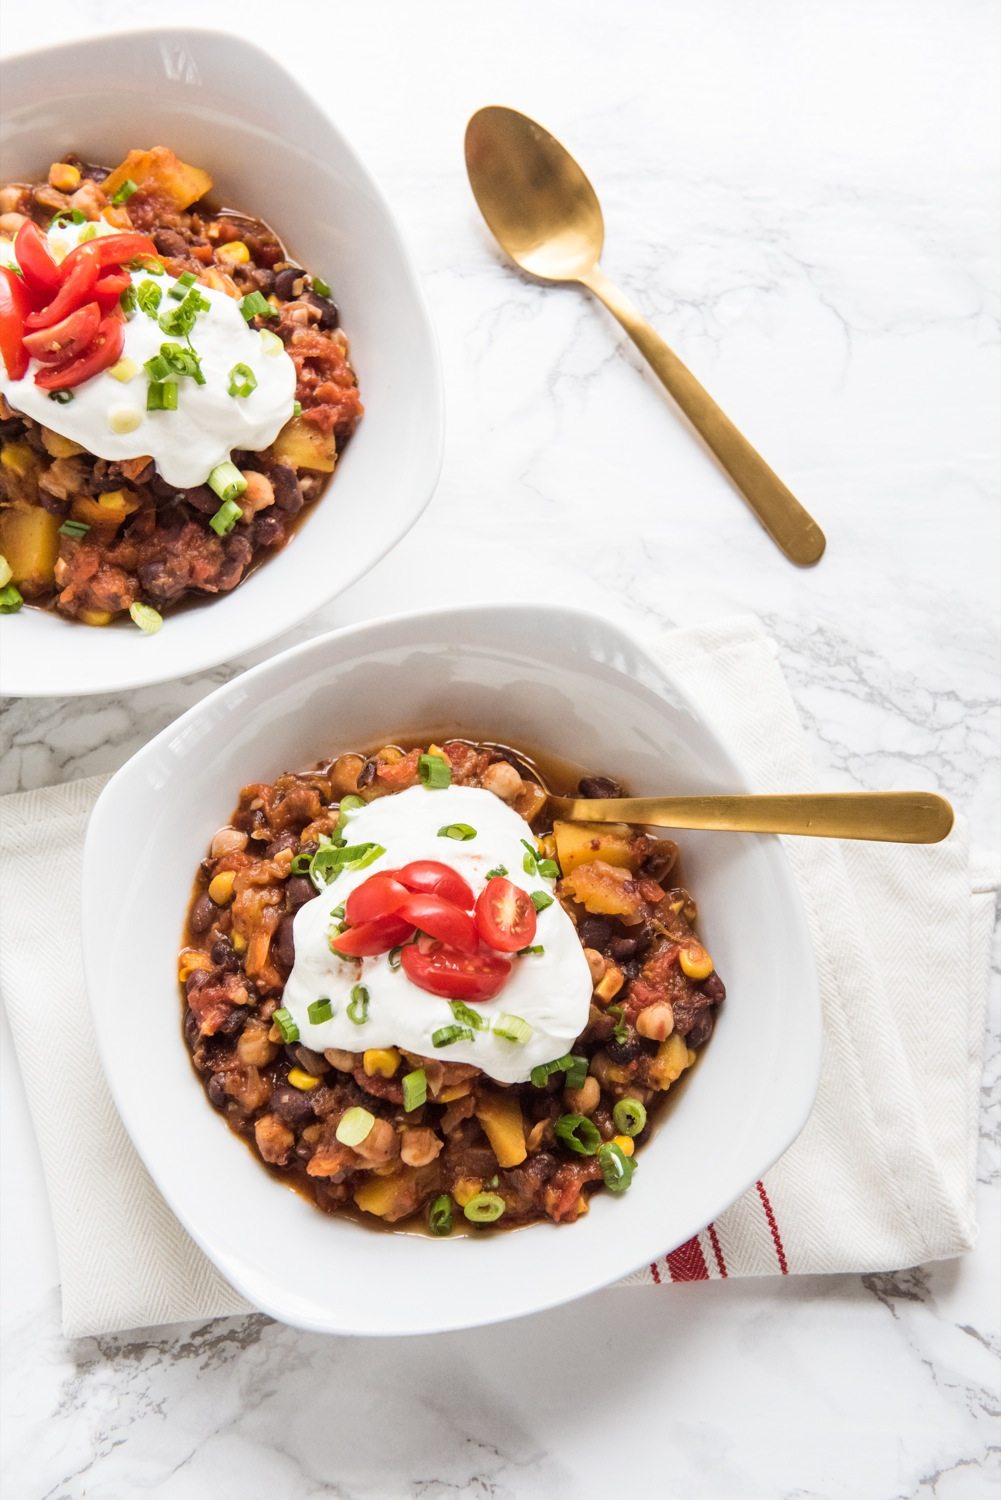 Butternut Squash Vegetarian Chili Recipe | Super Bowl recipes, entertaining tips, Super Bowl party ideas, party themes and more from @cydconverse